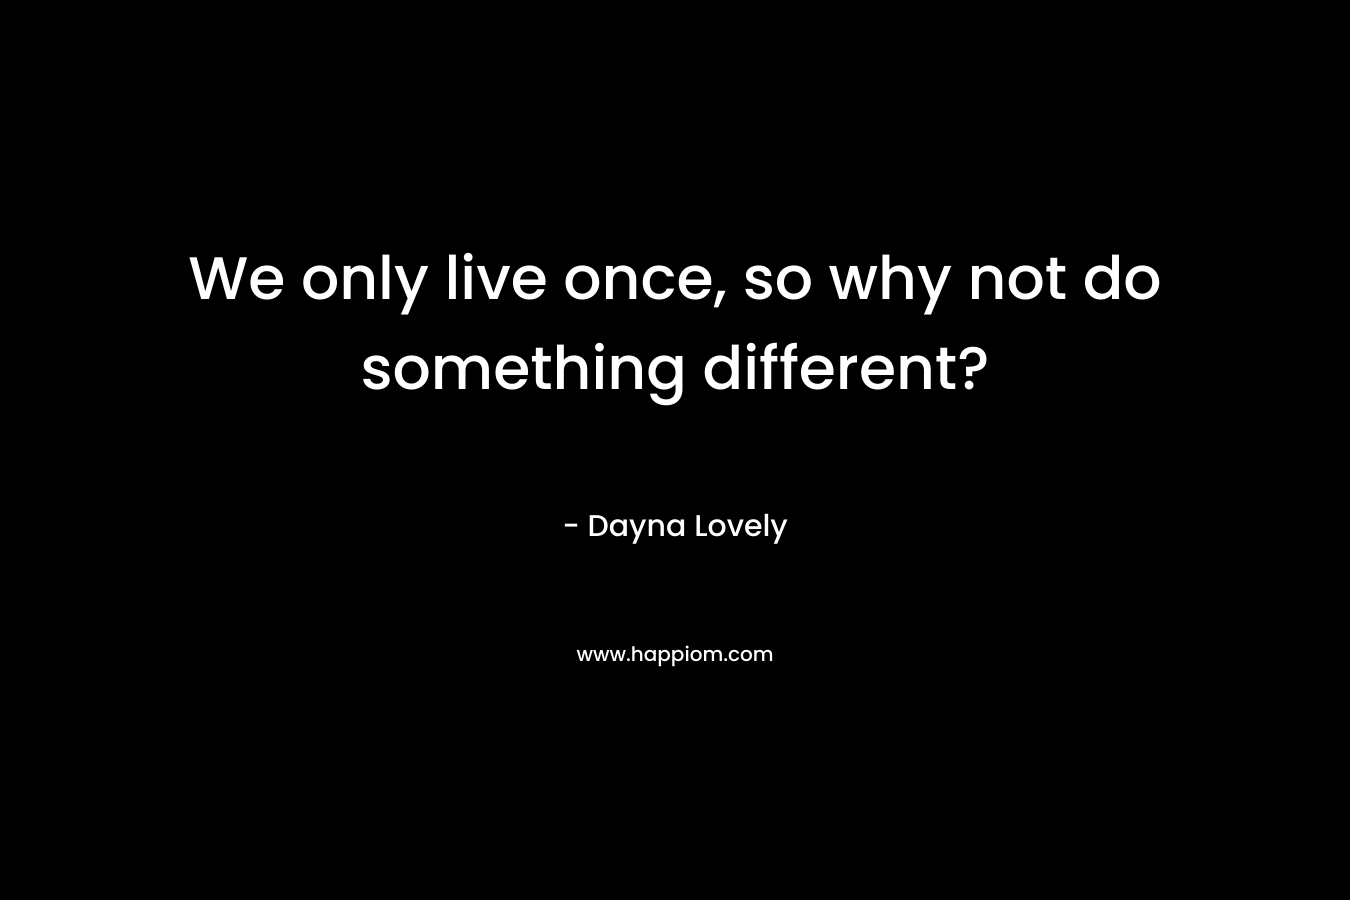 We only live once, so why not do something different? – Dayna Lovely